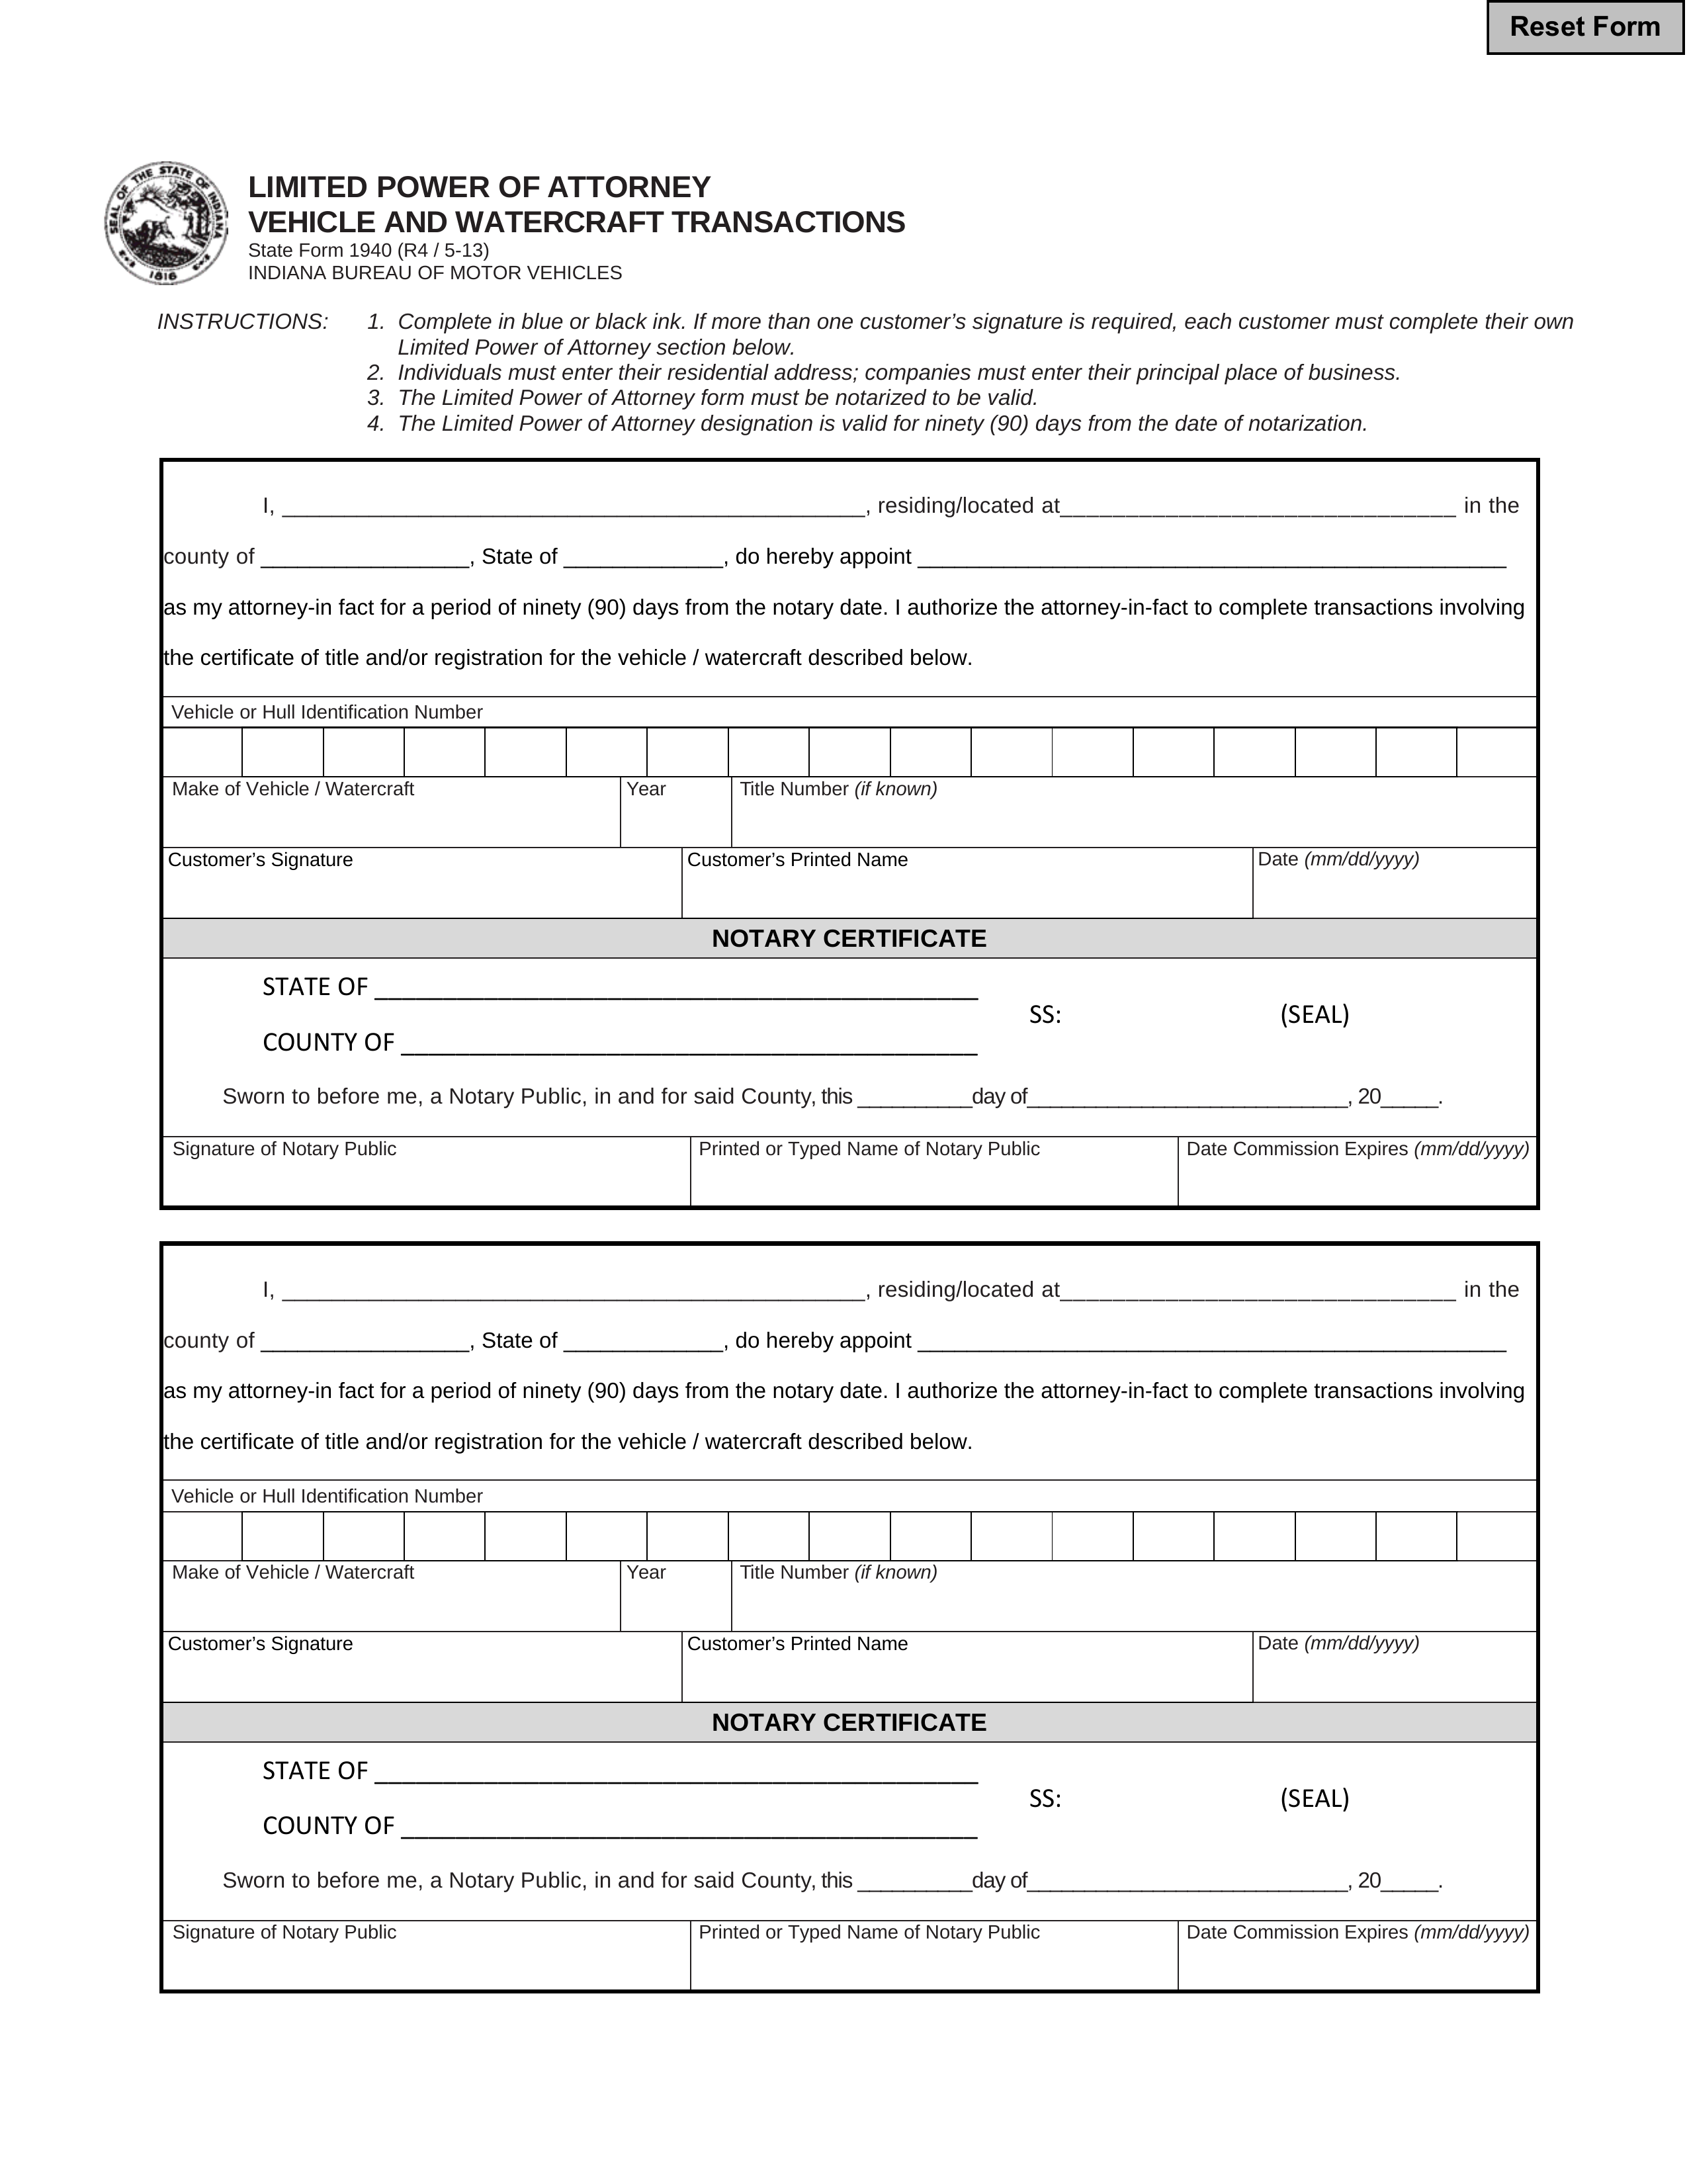 Free Indiana Motor Vehicle Power Of Attorney Form 01940 PDF EForms